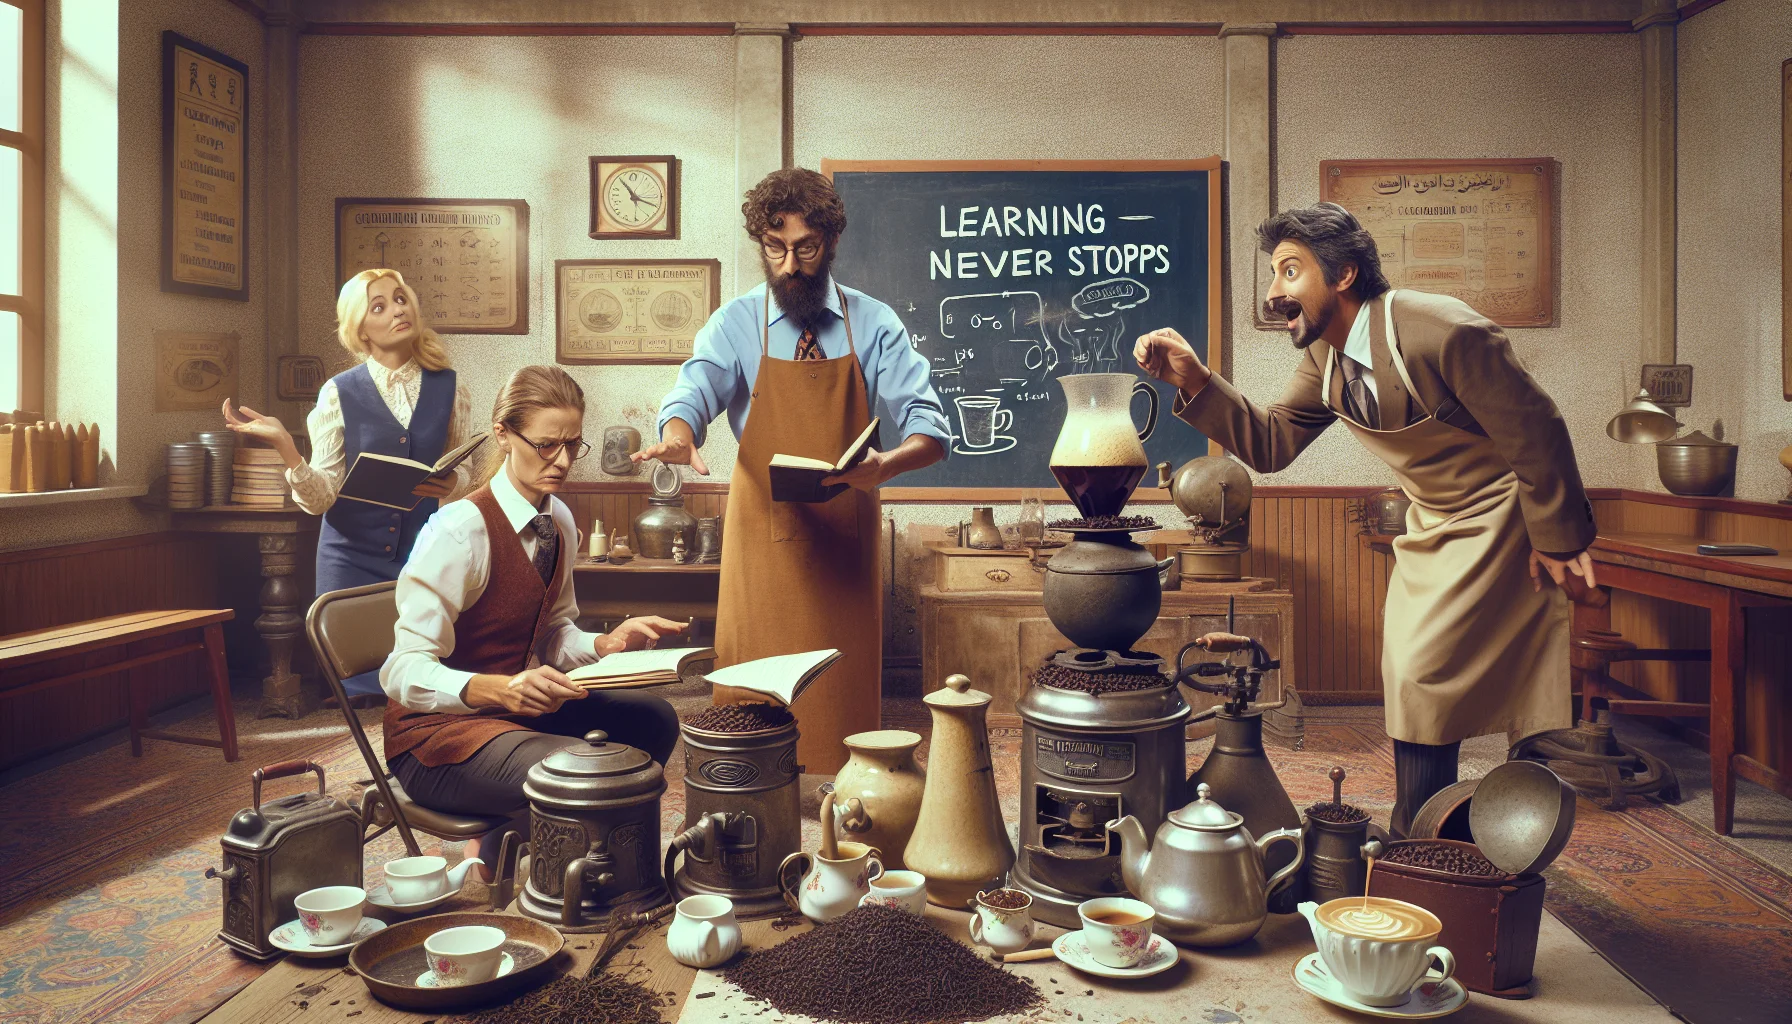 Compose a humorous, detailed scene of an ongoing brewing lesson. The classroom is rustic, filled with various vintage brewing equipment for both tea and coffee. A chalkboard in the background reads, 'Learning Never Stops'. A Caucasian woman is attentively following the instructions of a Middle-Eastern man demonstrating the art of tea brewing, while a Hispanic man stumbles upon an overly frothy coffee latte he just brewed. The room is scattered with tea leaves, coffee beans, porcelain cups and cafetières. The atmosphere is chaotic yet joyful signifying the excitement of learning.